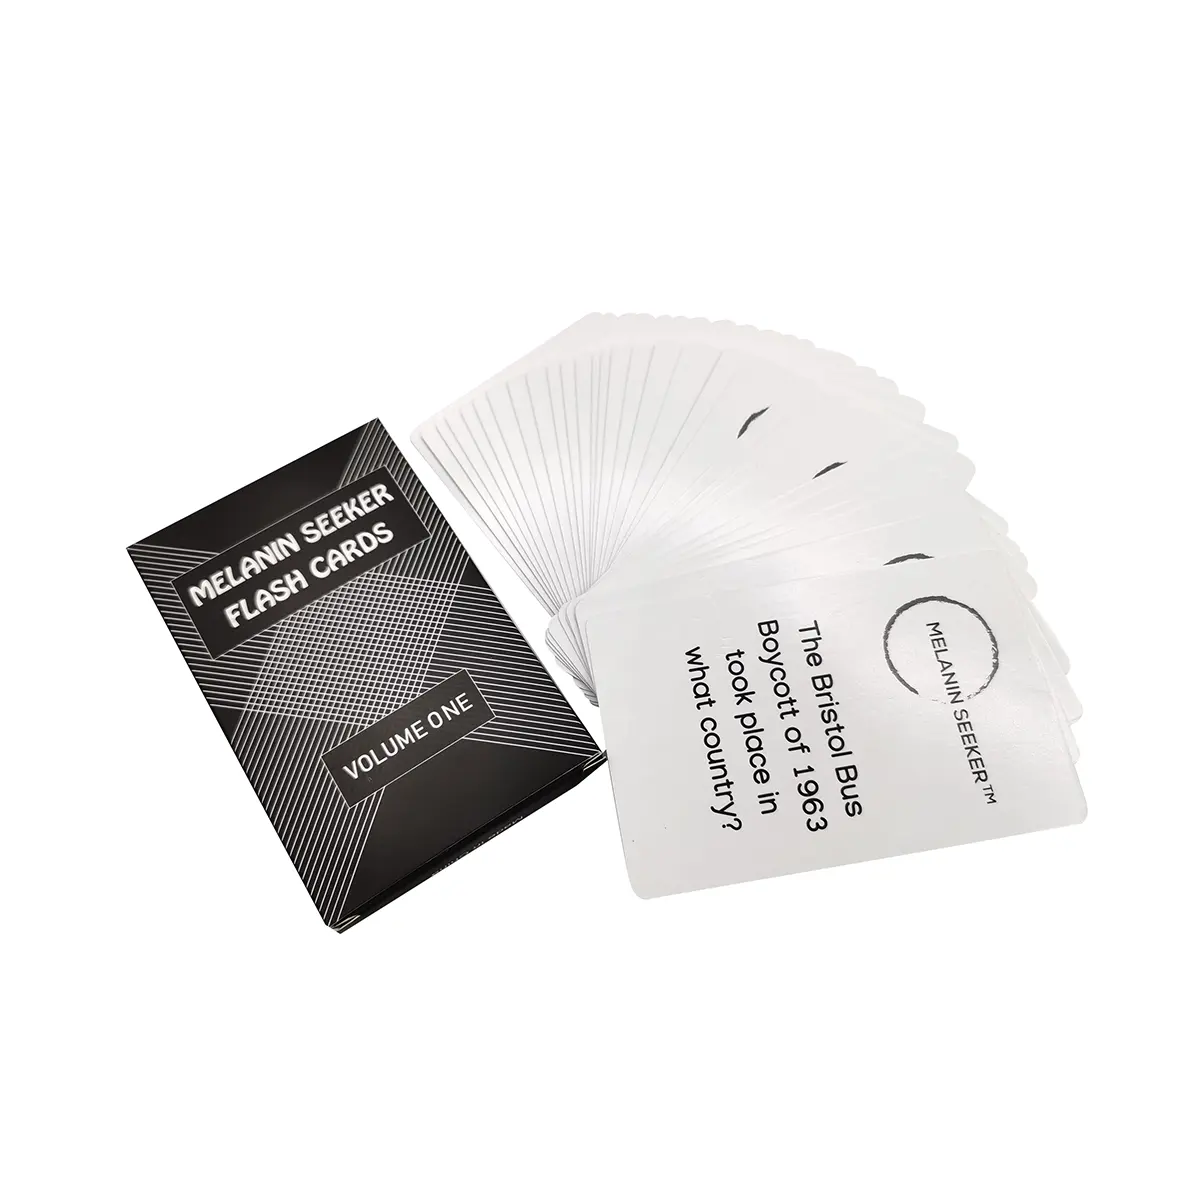 Good Quality Custom Black And White Paper Material Questions And Answers Melamin Flash Cards With Box